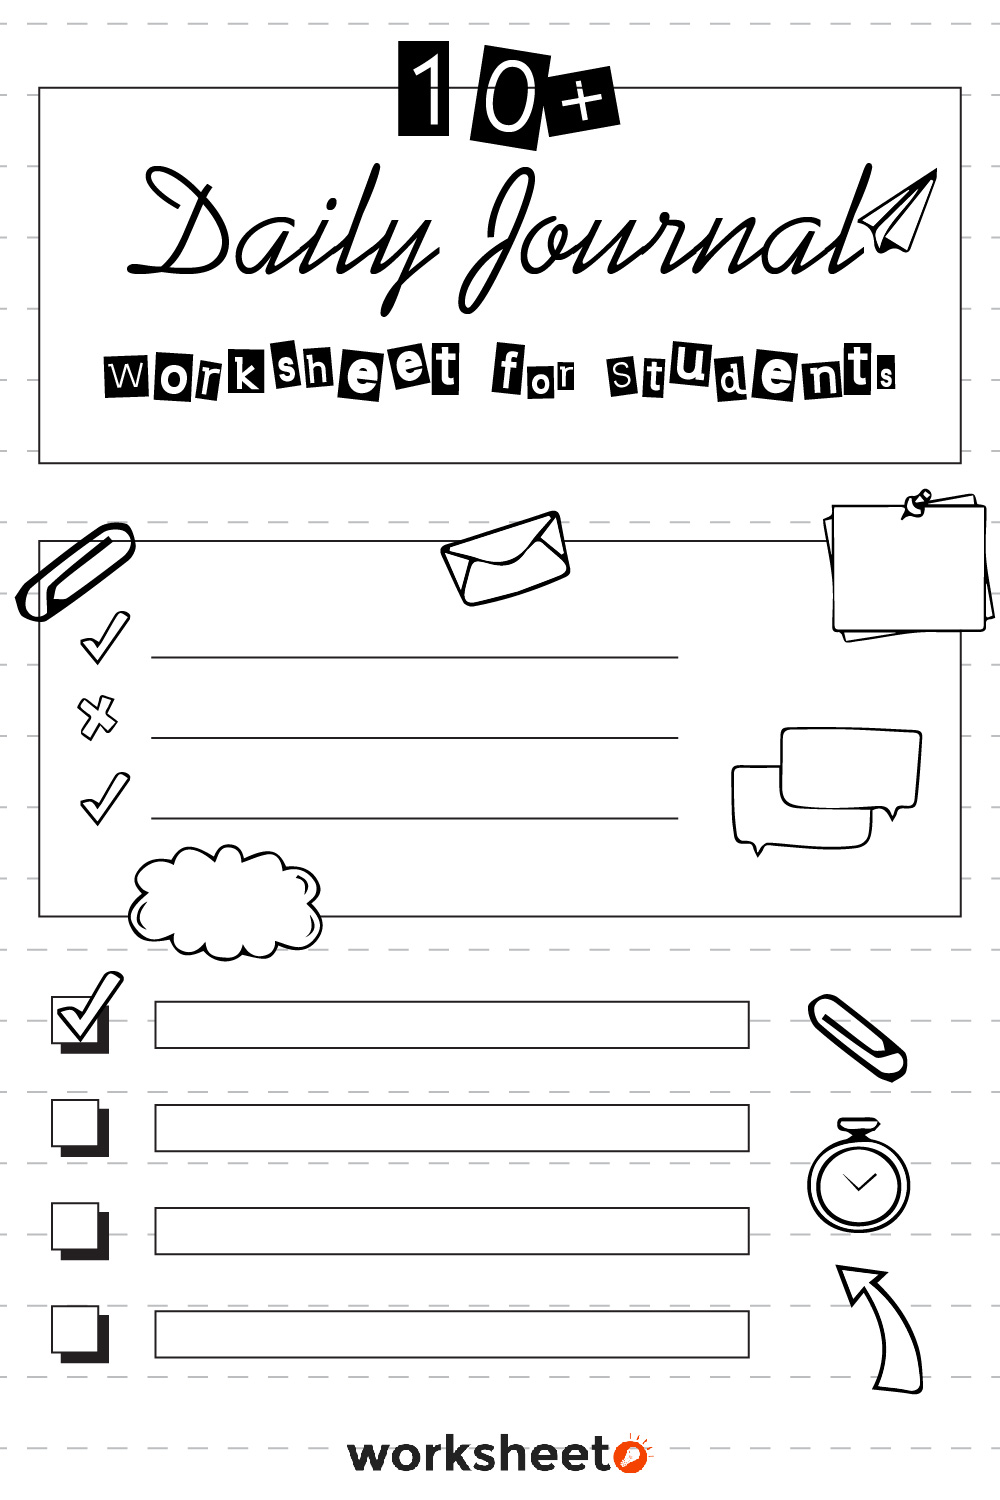 Daily Journal Worksheet for Students